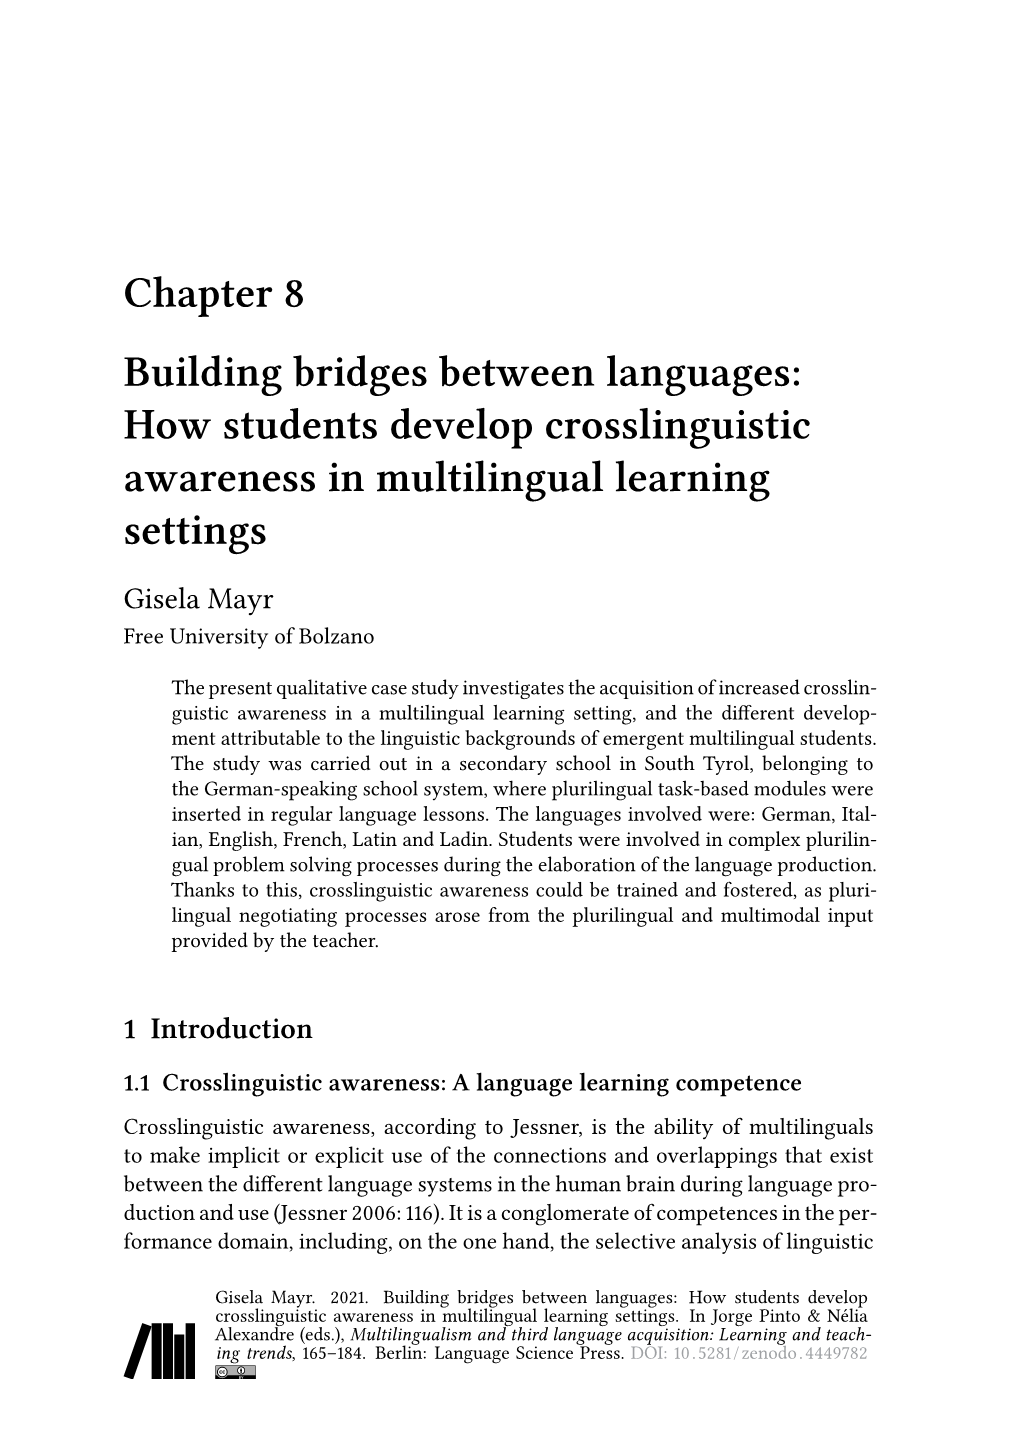 How Students Develop Crosslinguistic Awareness in Multilingual Learning Settings